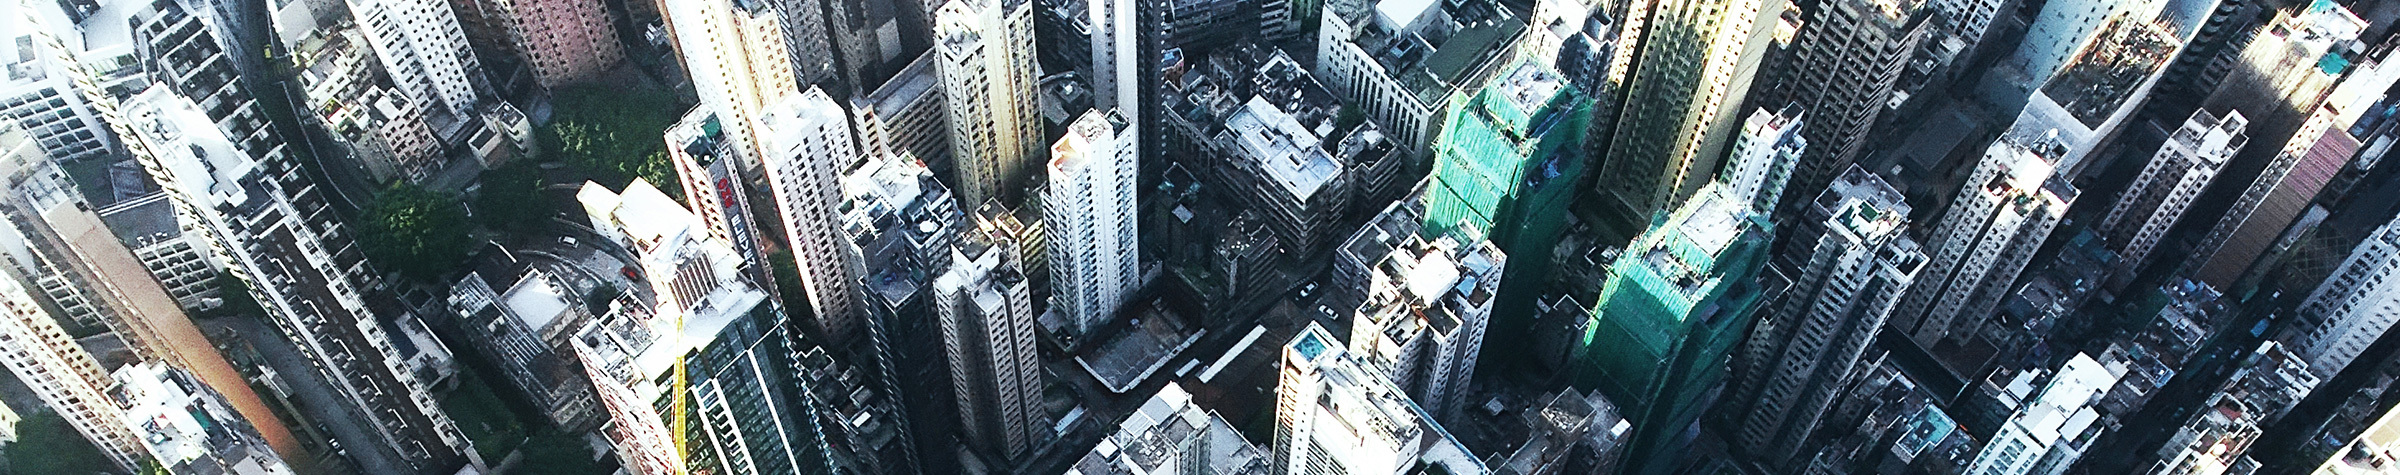 Aerial City Scape of Skyscrapers